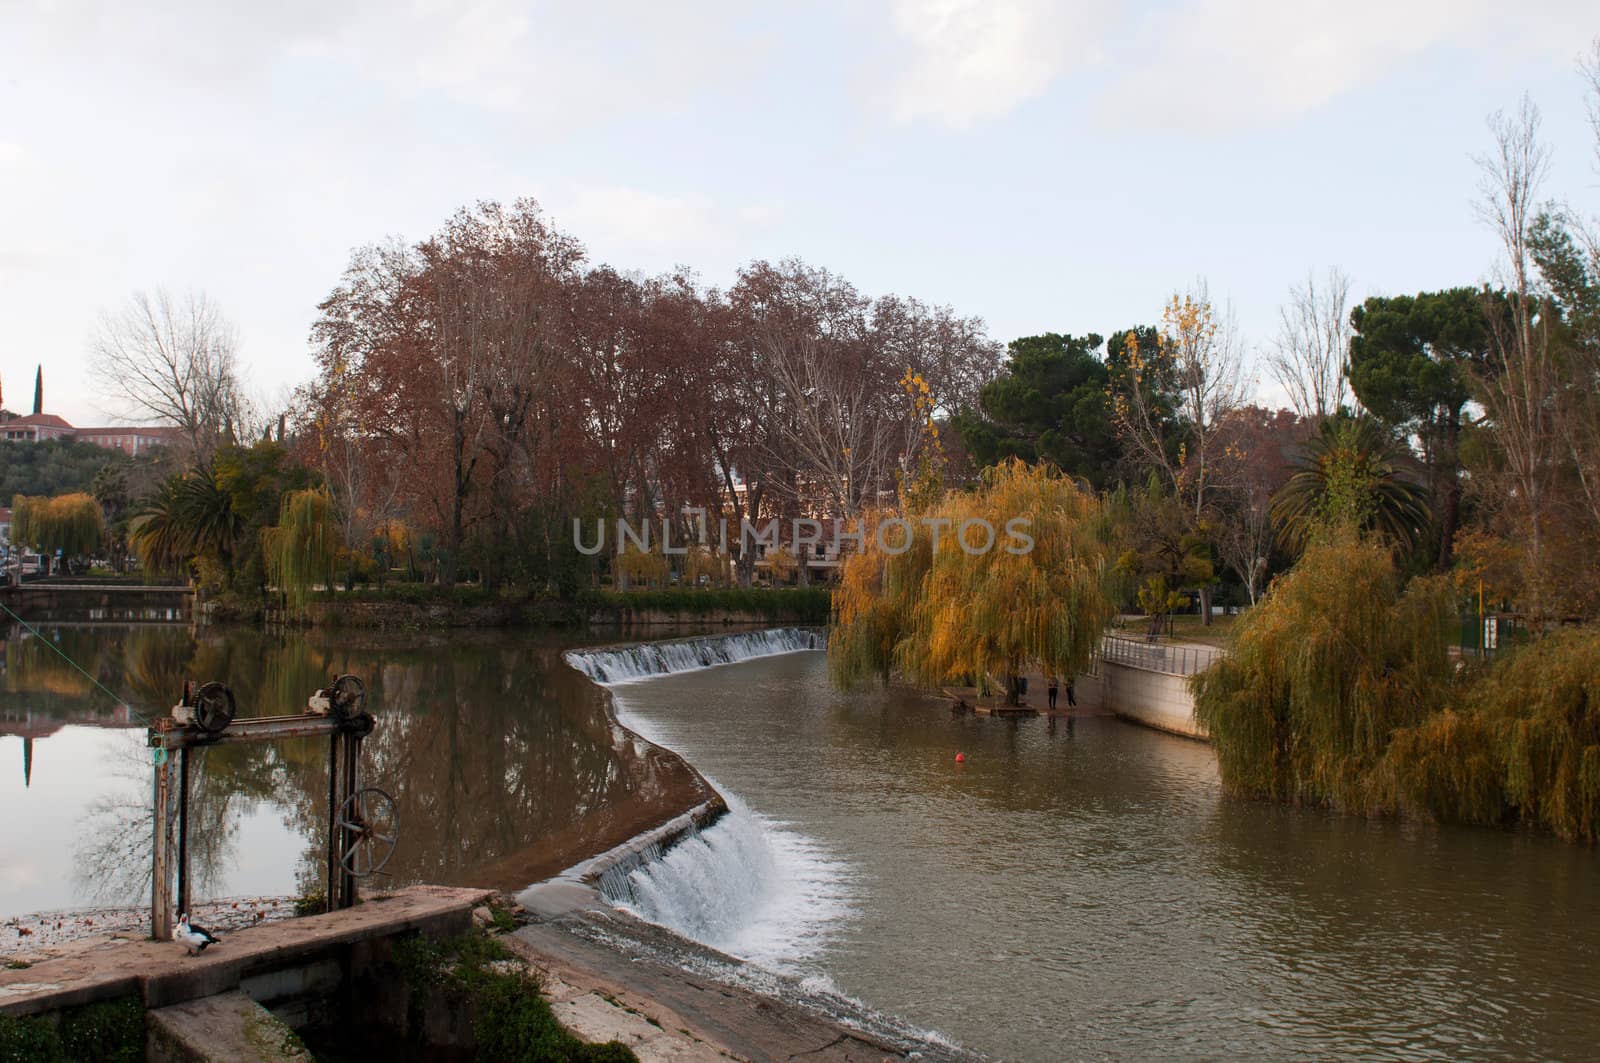 gorgeous Nab�o river surrounded by trees in the city of Tomar, Portugal